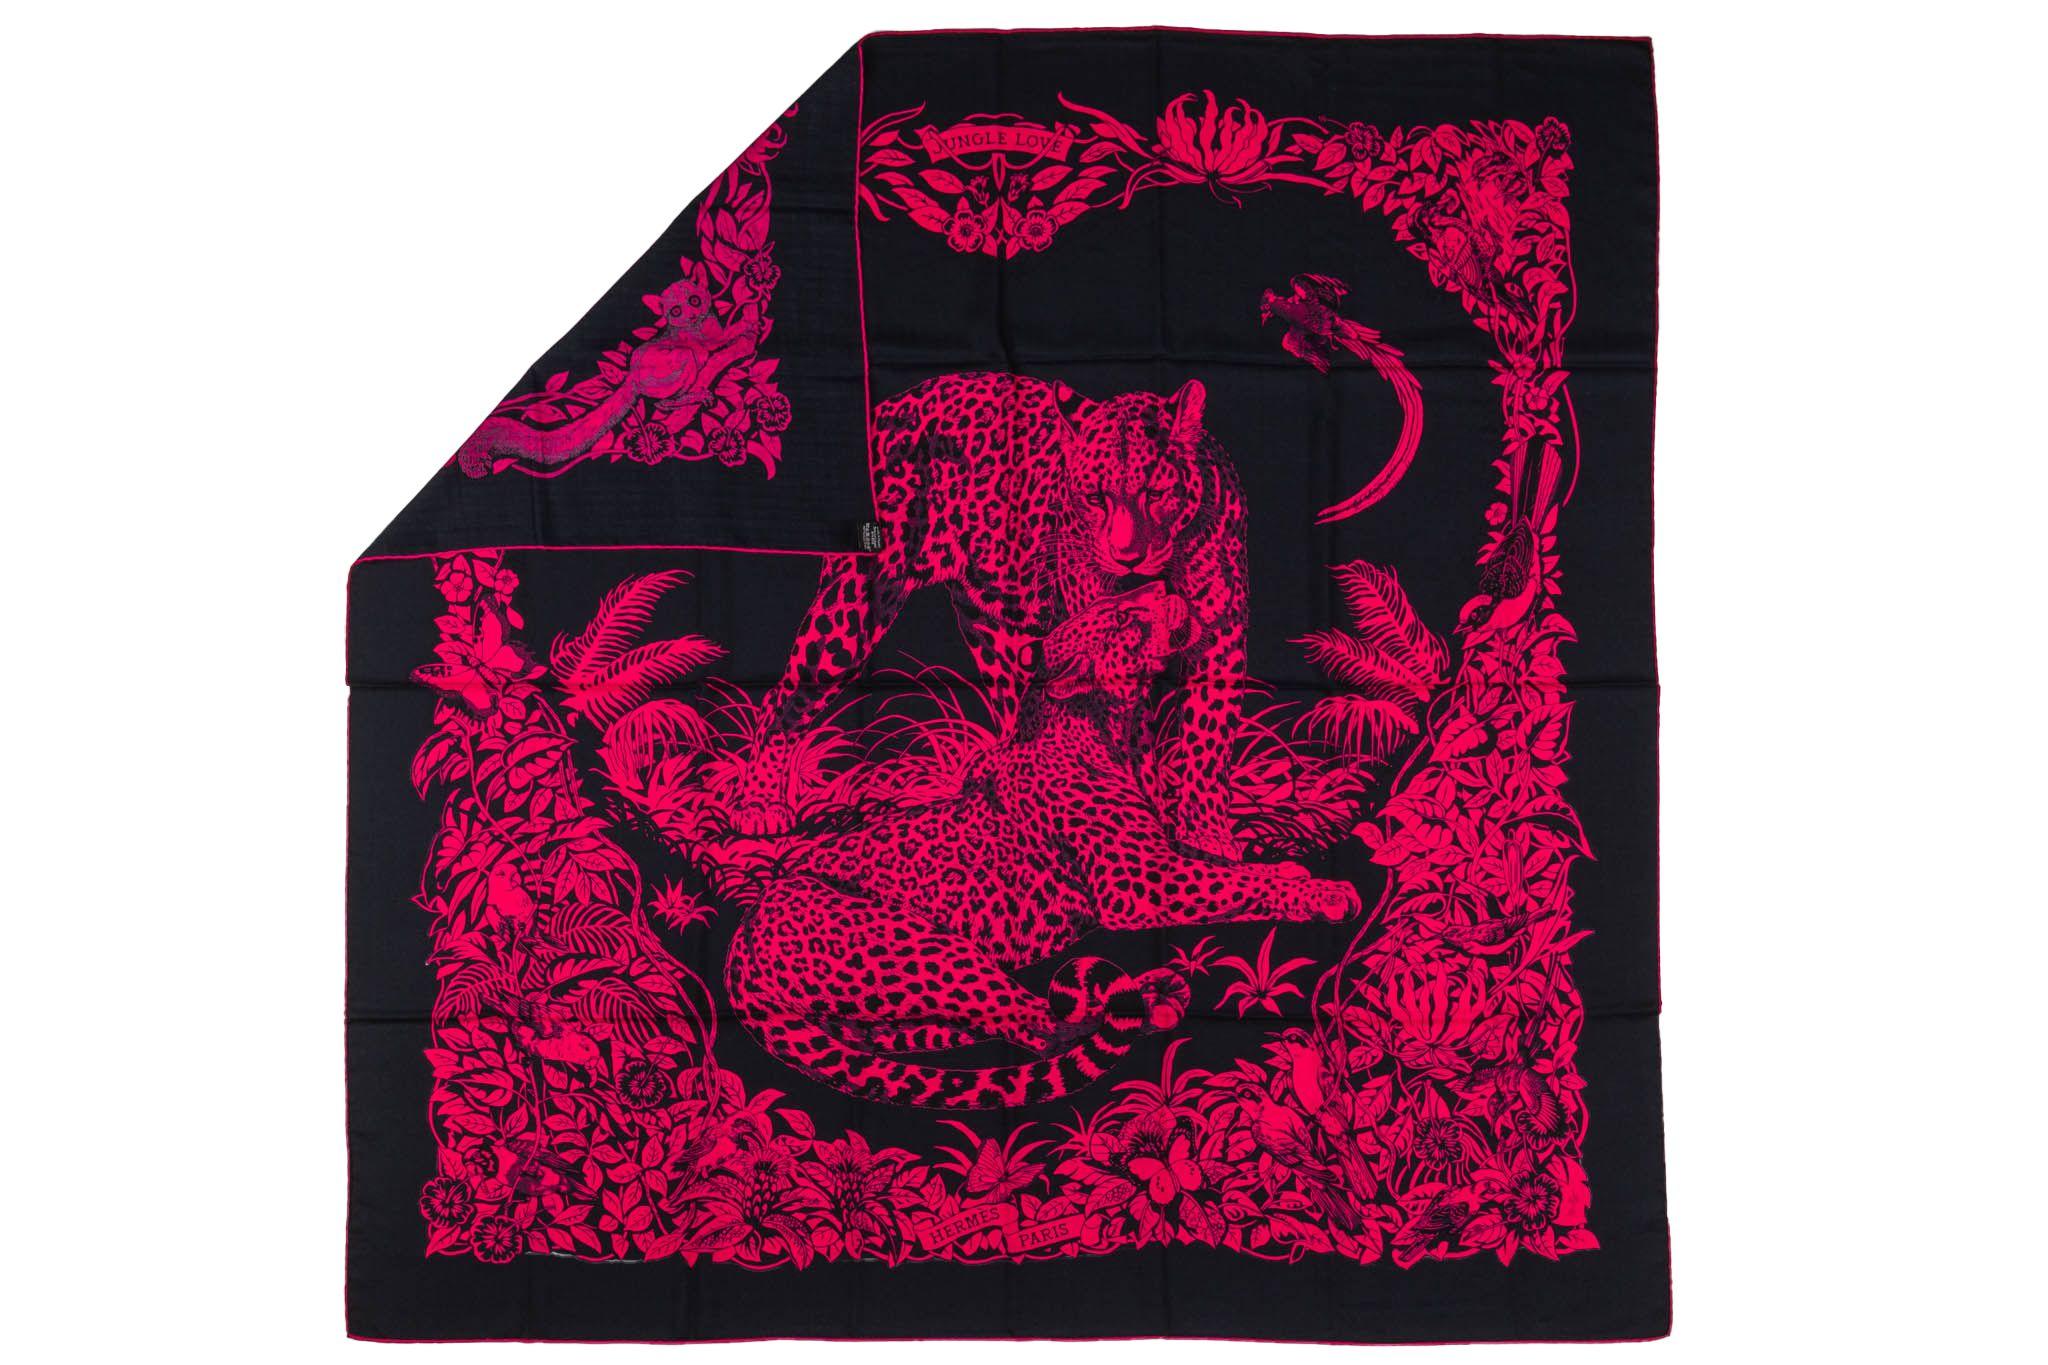 Hermès oversize square cashmere and silk blend Jungle Love scarf by Robert Dallet. Black and fuchsia color way with hand-rolled edges. Comes in original box.